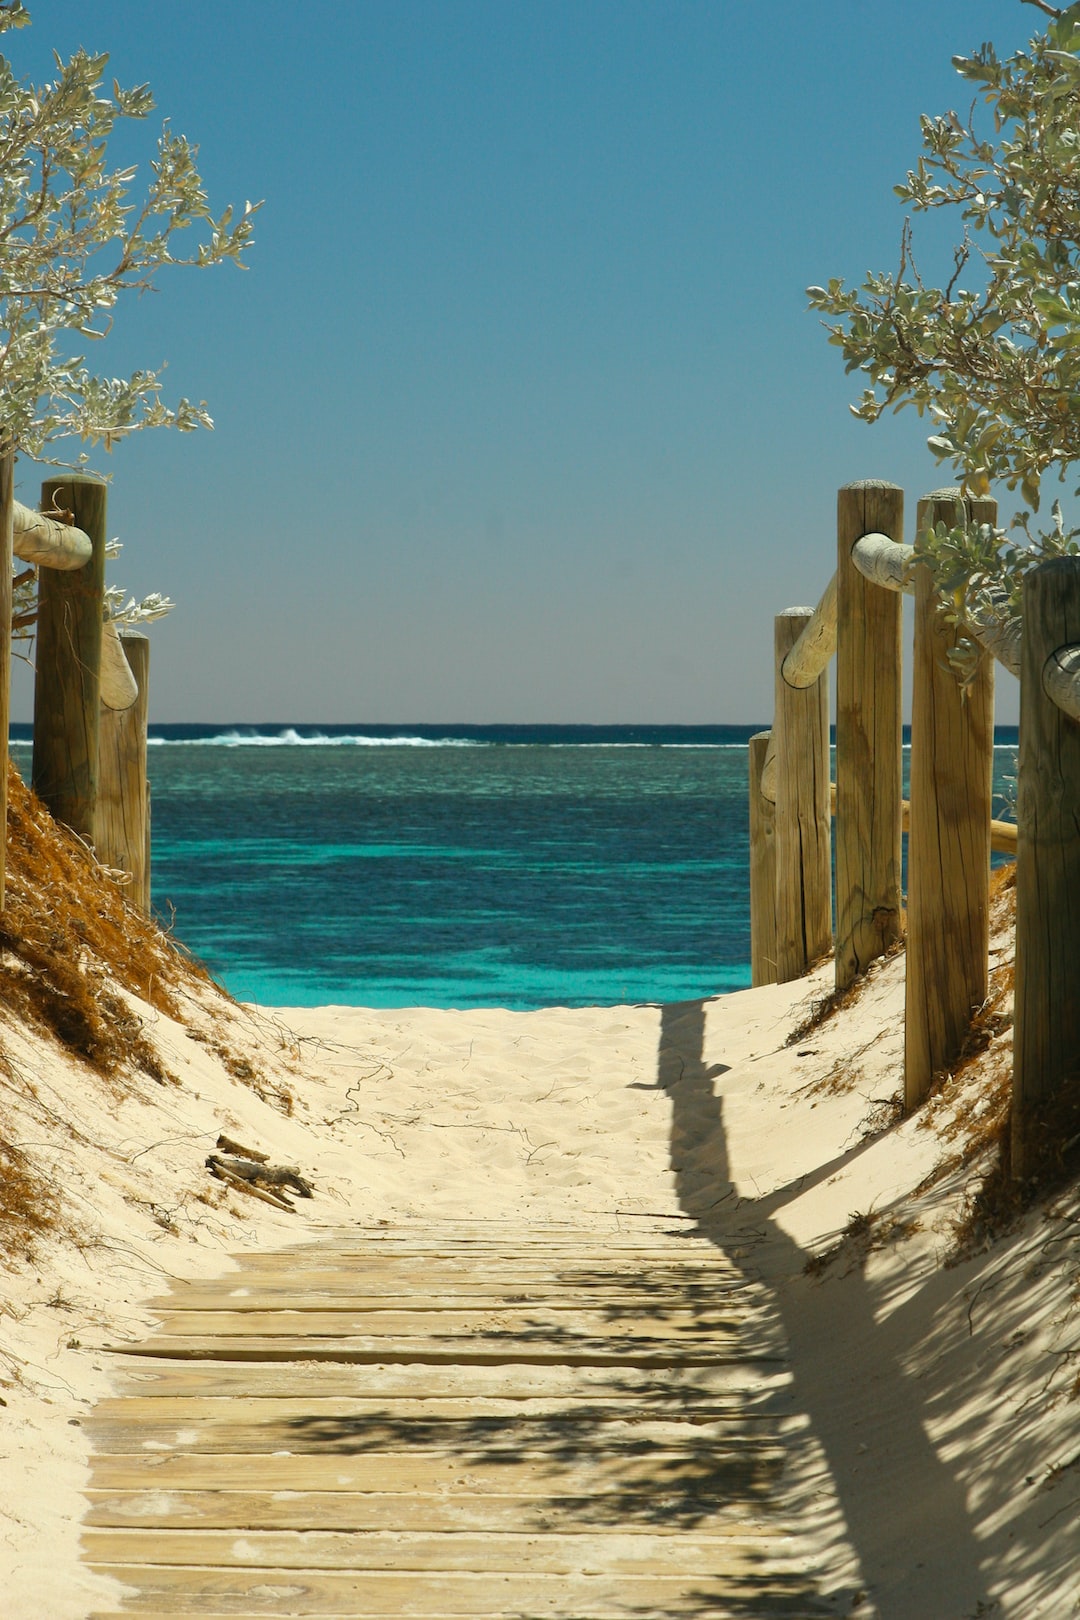 What month is best for Fraser Island?